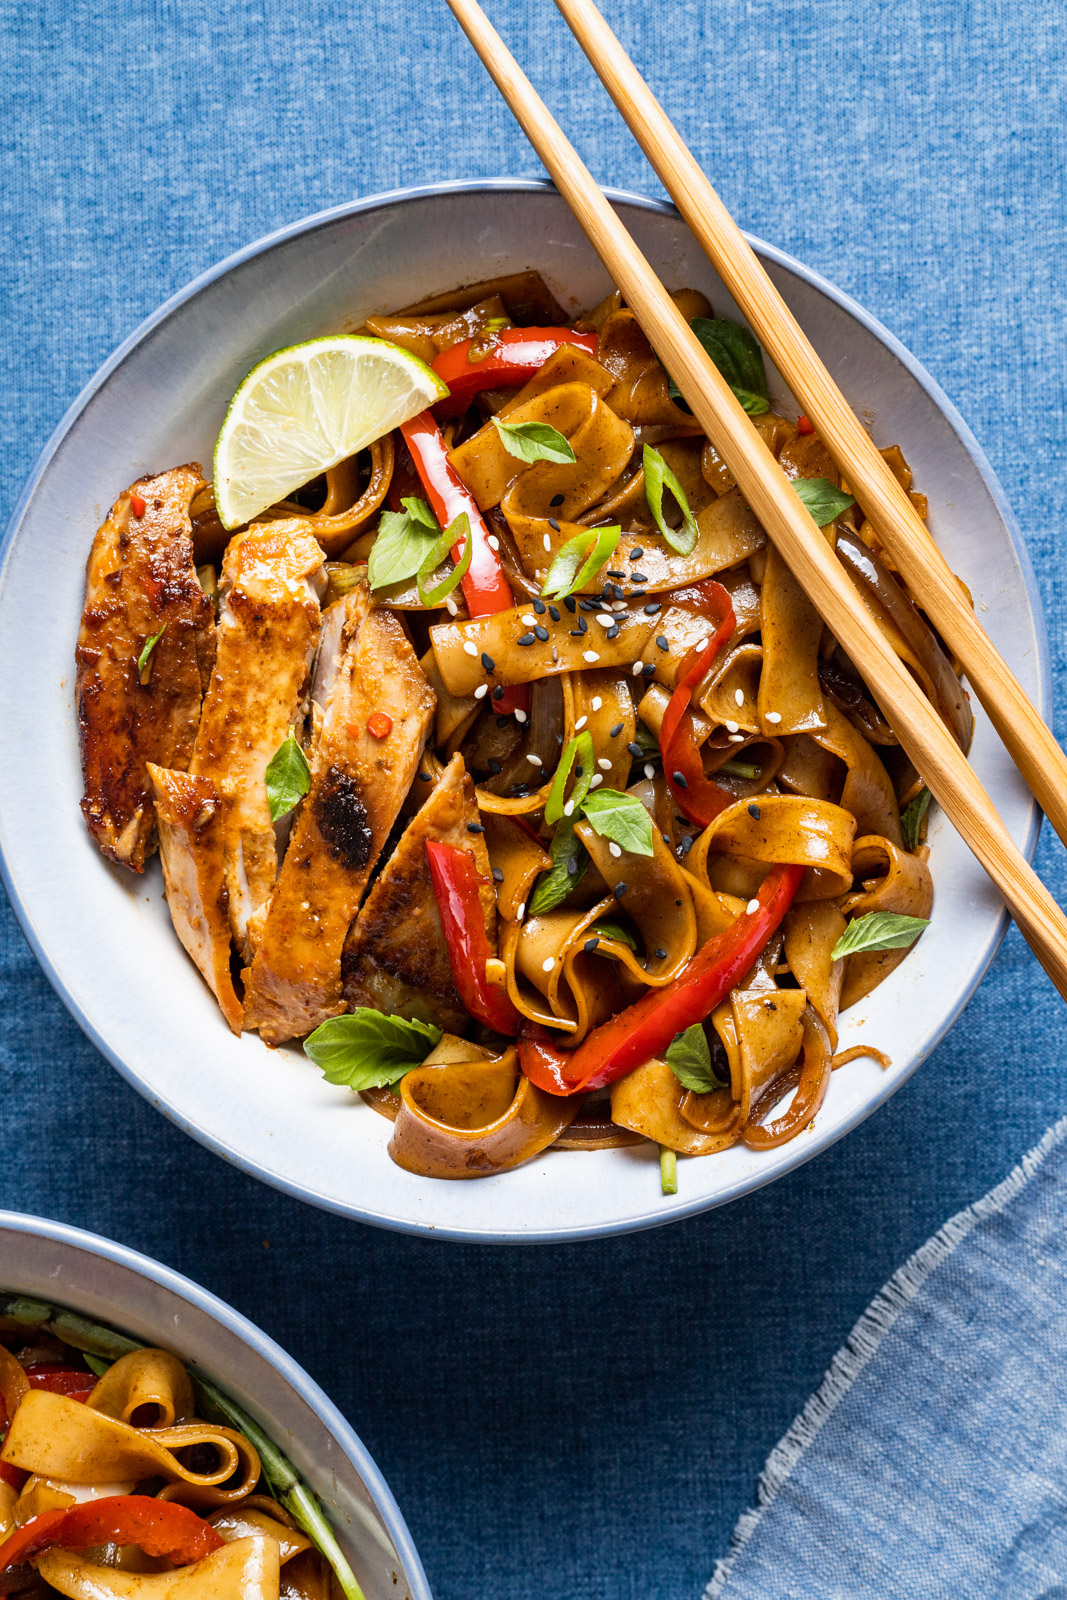 Thai Chili Yellowfin Tuna Steaks With Spicy Drunken Noodles (Pad Kee Mao)